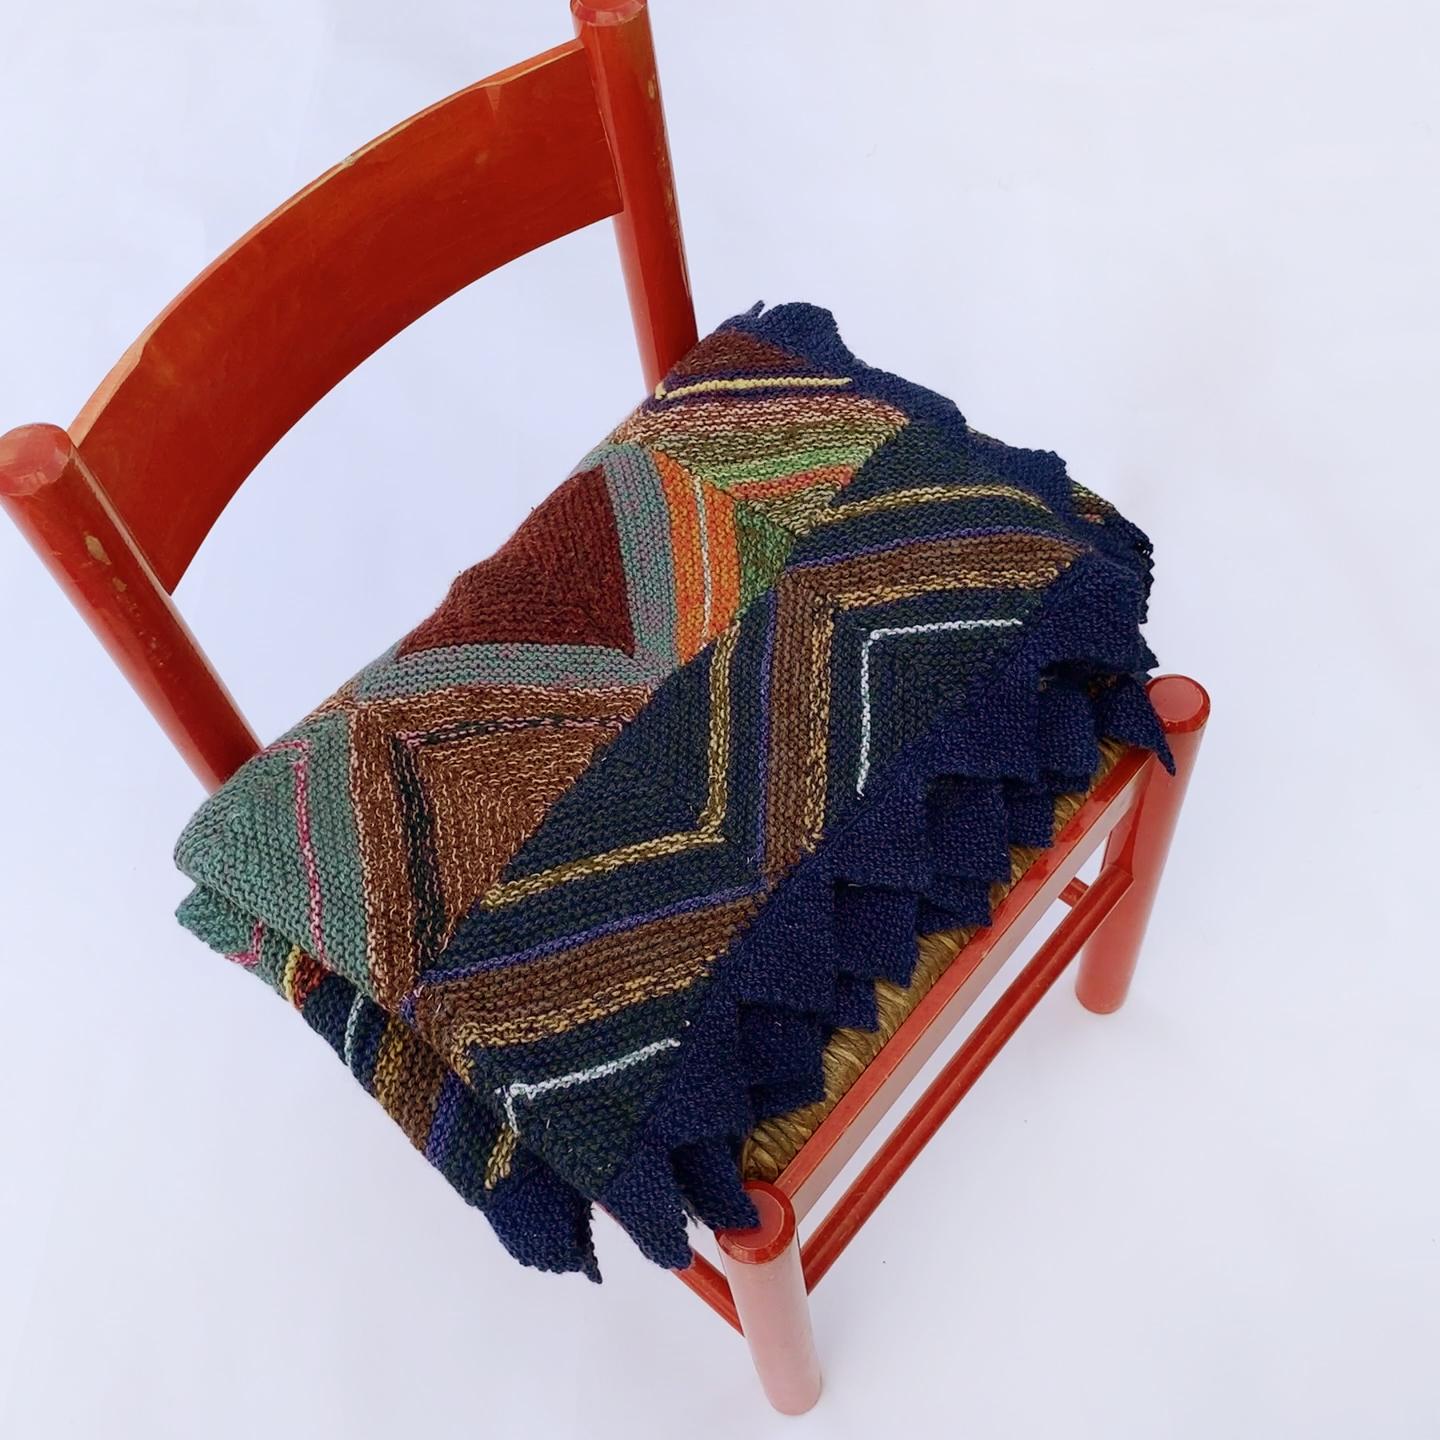 Handmade Knitted Patchwork Throw Wool Blanket Sofa Bed Armchair 1970s vintage For Sale 4